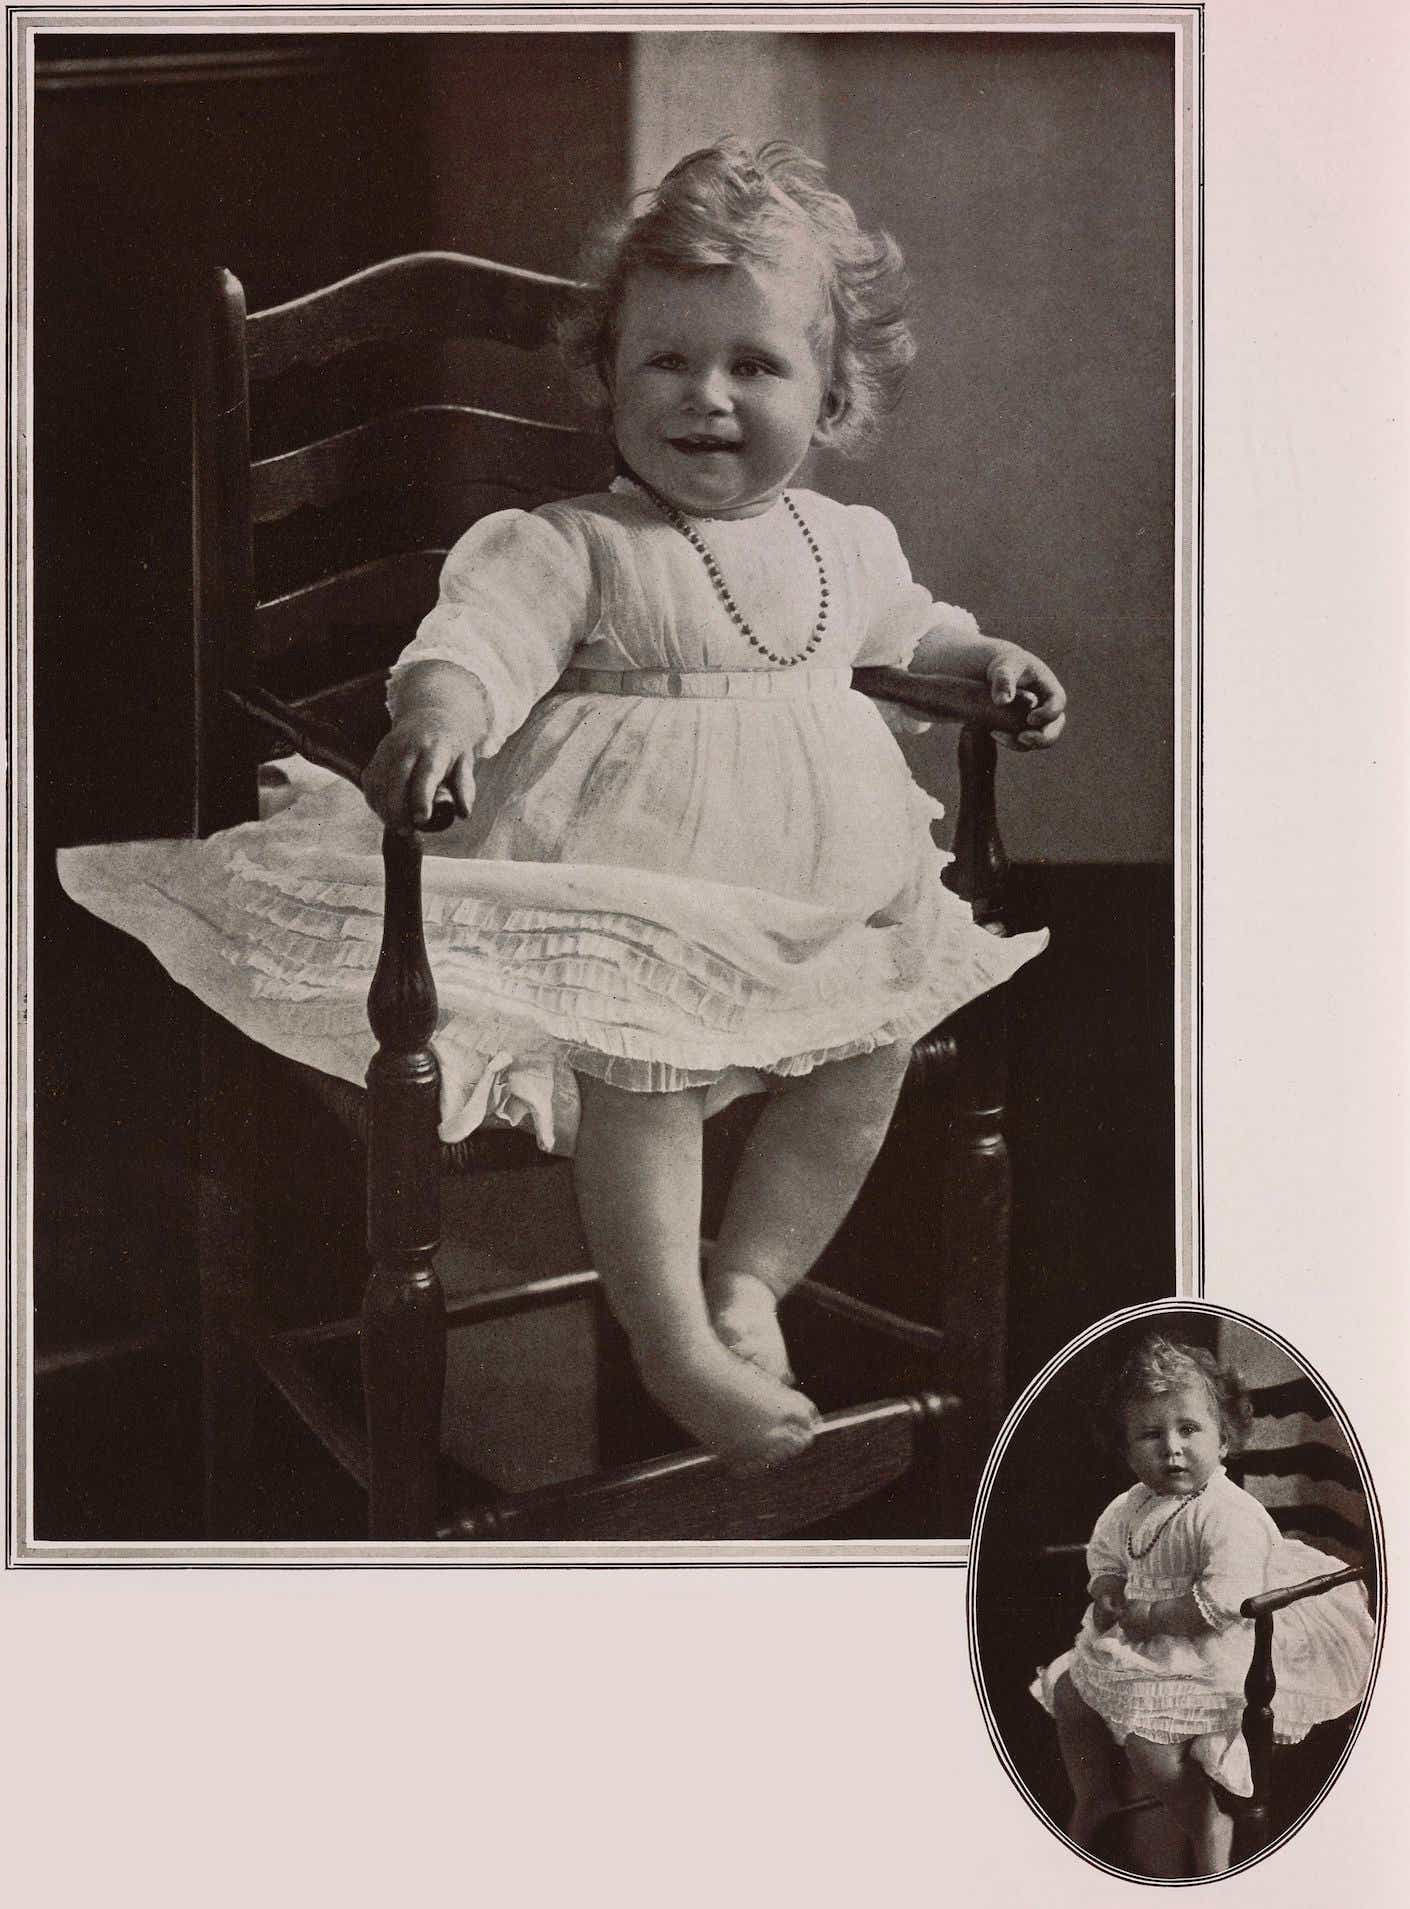 A one-year-old Princess Elizabeth appears in The Tatler